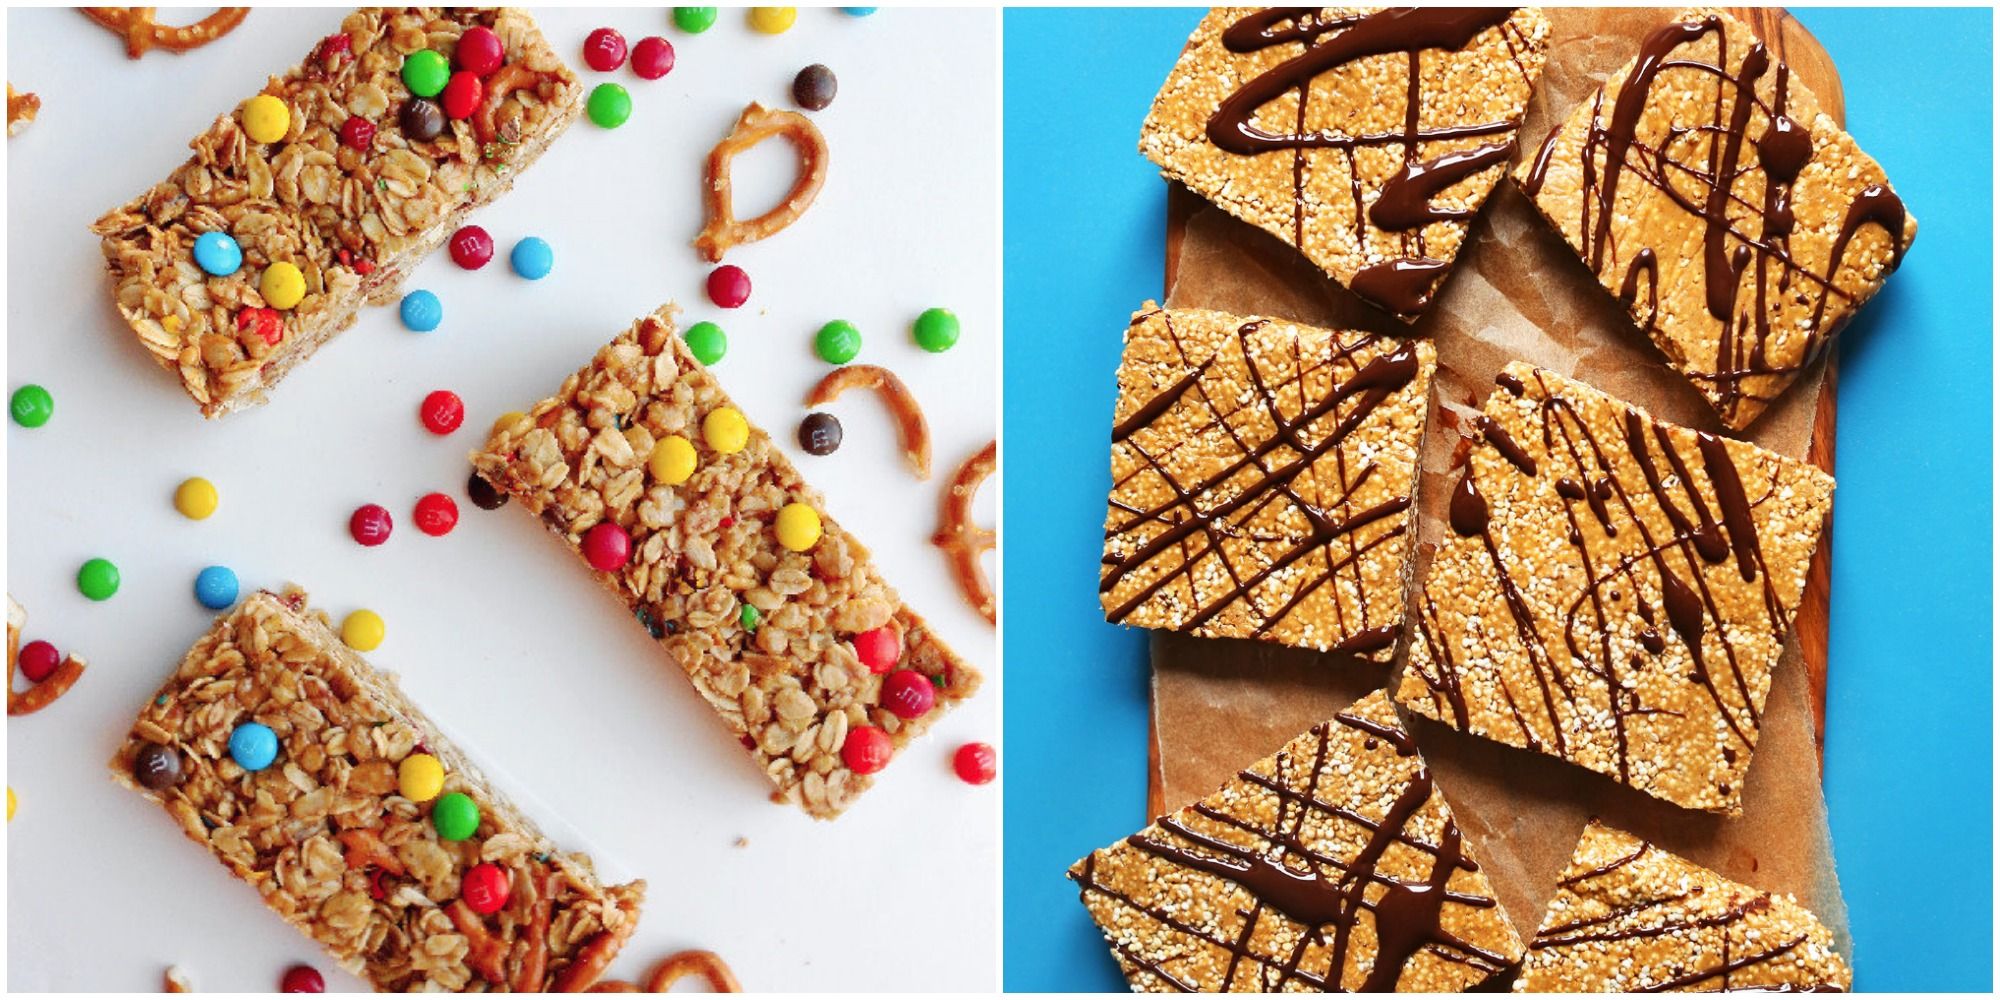 6-Ingredient Cereal Bars ⋆ 100 Days of Real Food